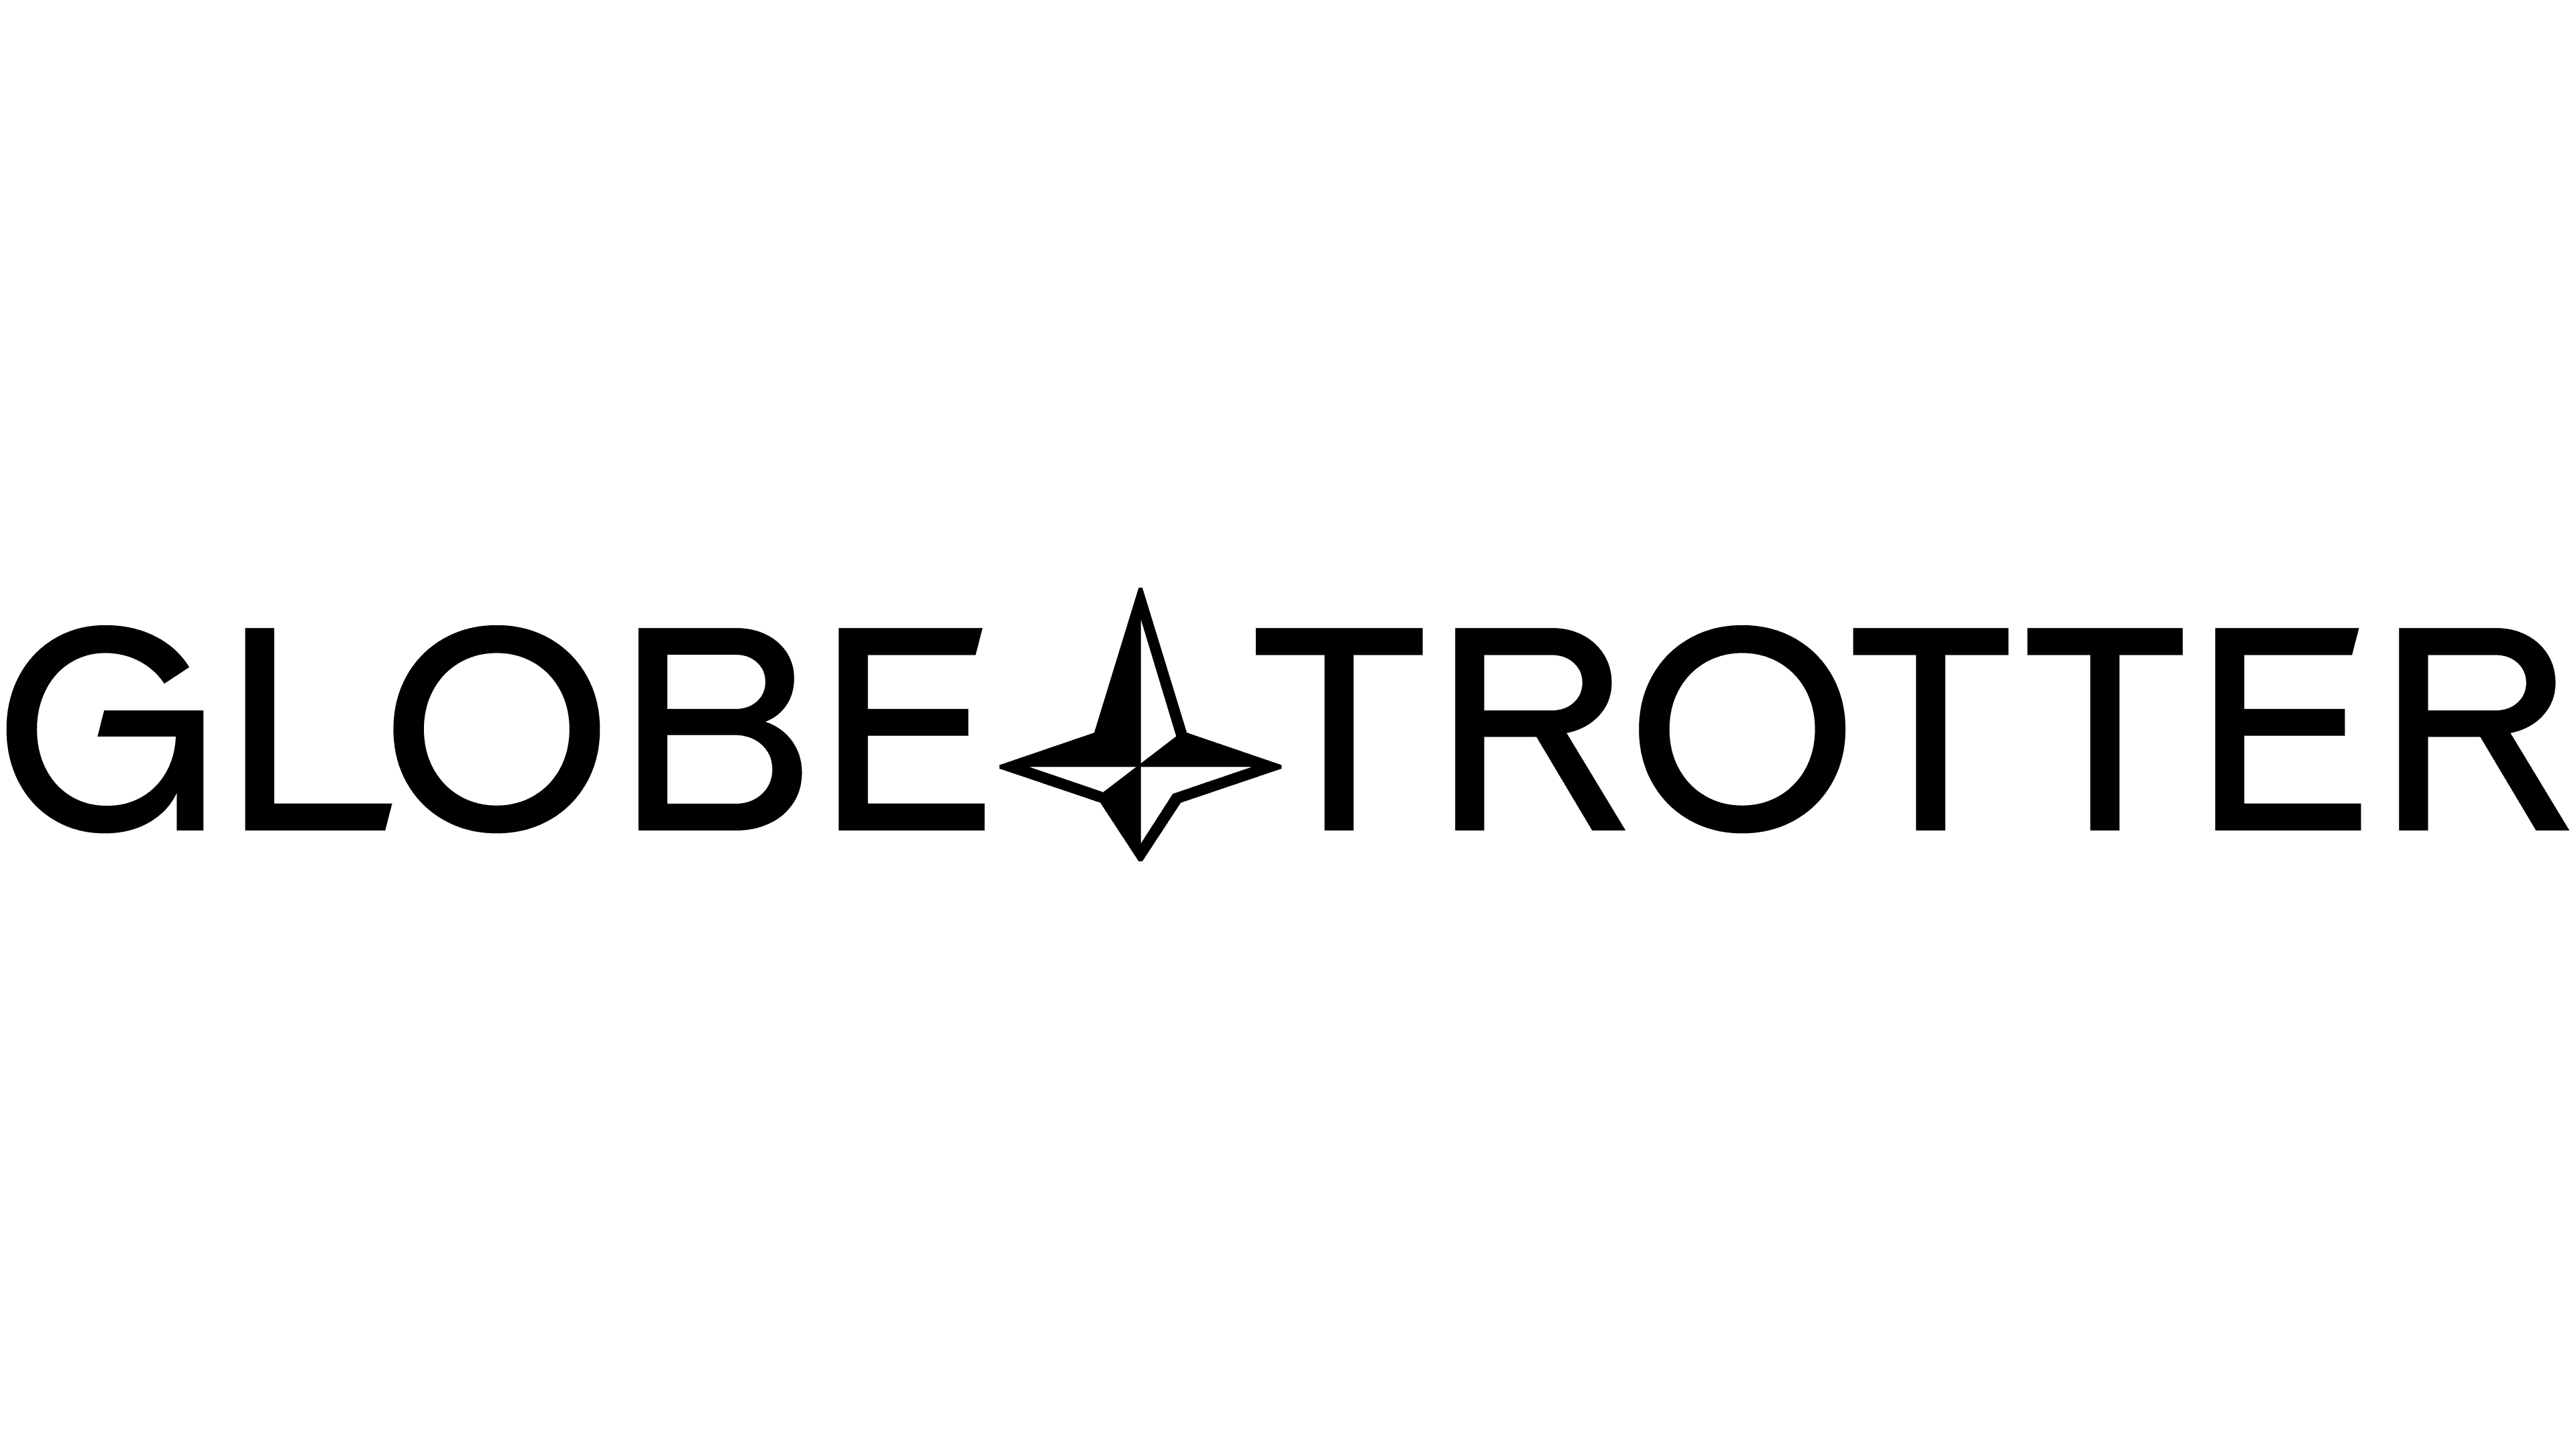 Globe-Trotter Logo and symbol, meaning, history, PNG, brand